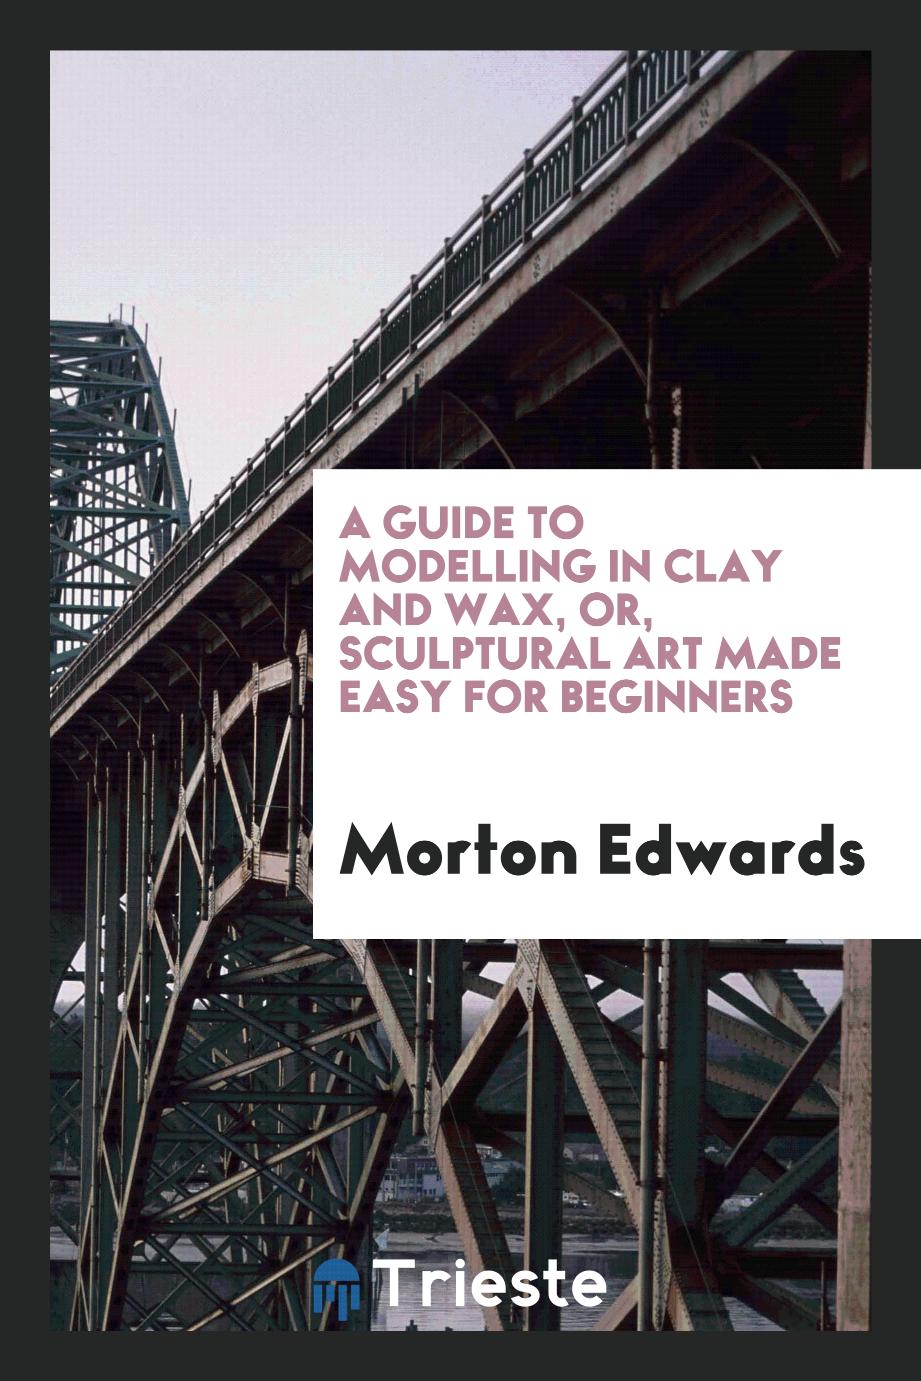 A guide to modelling in clay and wax, or, Sculptural art made easy for beginners